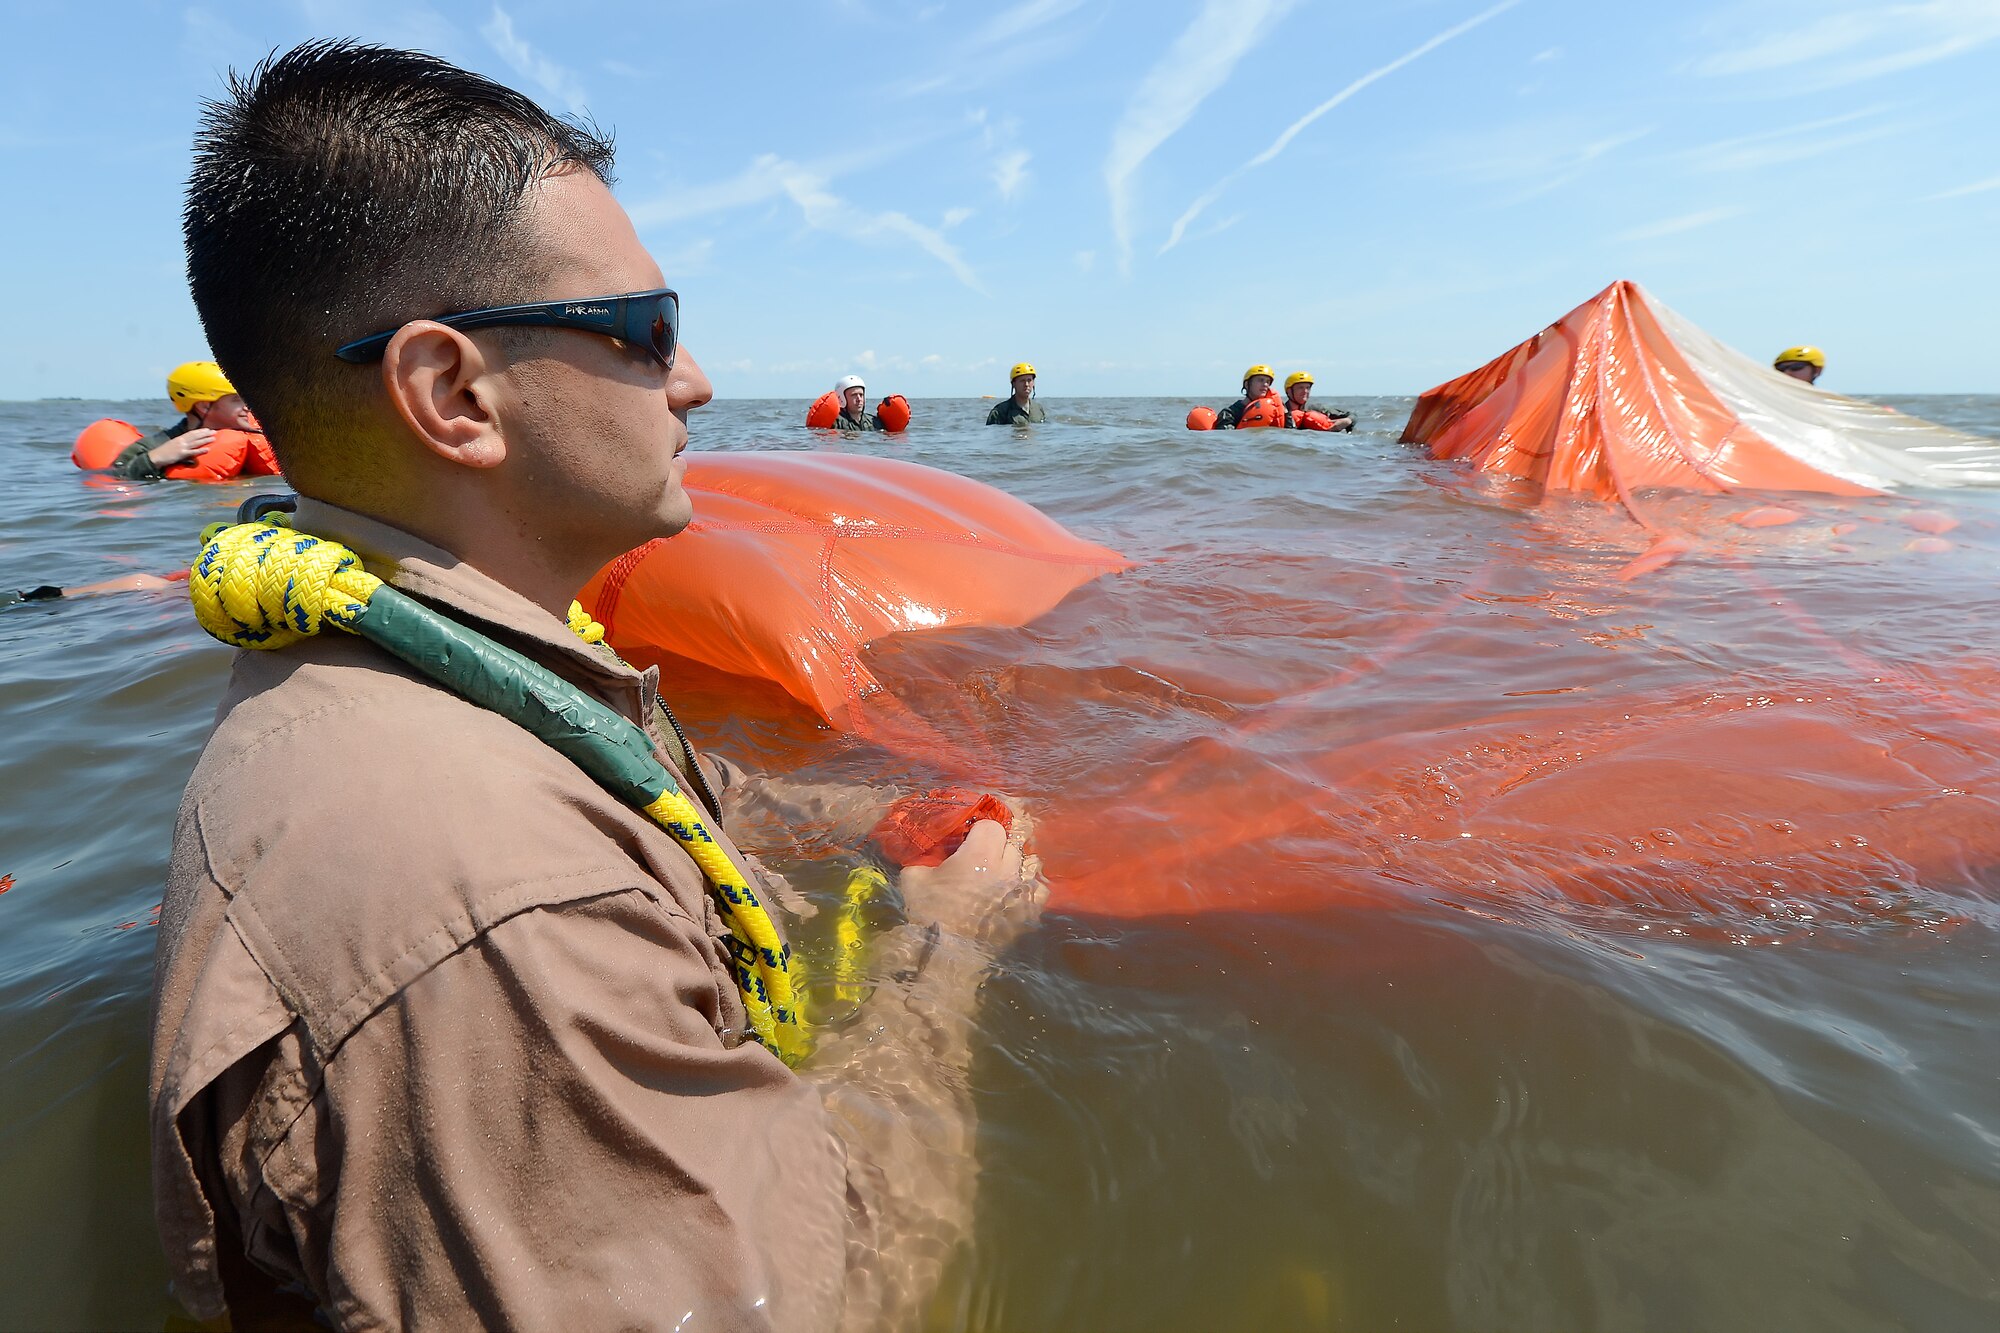 Technical Sgt. Joseph Monreal, 436th Operations Support Squadron Survival, Evasion, Resistance and Escape Operations flight chief, watches as a trainee uses a seam in a C-9 round parachute canopy to move from one edge to the other during aircrew water survival refresher training in the Delaware Bay July 17, 2015, near Dover Air Force Base, Del. Aircrew members of the 436th Airlift Wing, 512th Airlift Wing which operate the C-5M Super Galaxy and C-17A Globemaster III, participated in the required refresher training. (U.S. Air Force photo/Greg L. Davis)